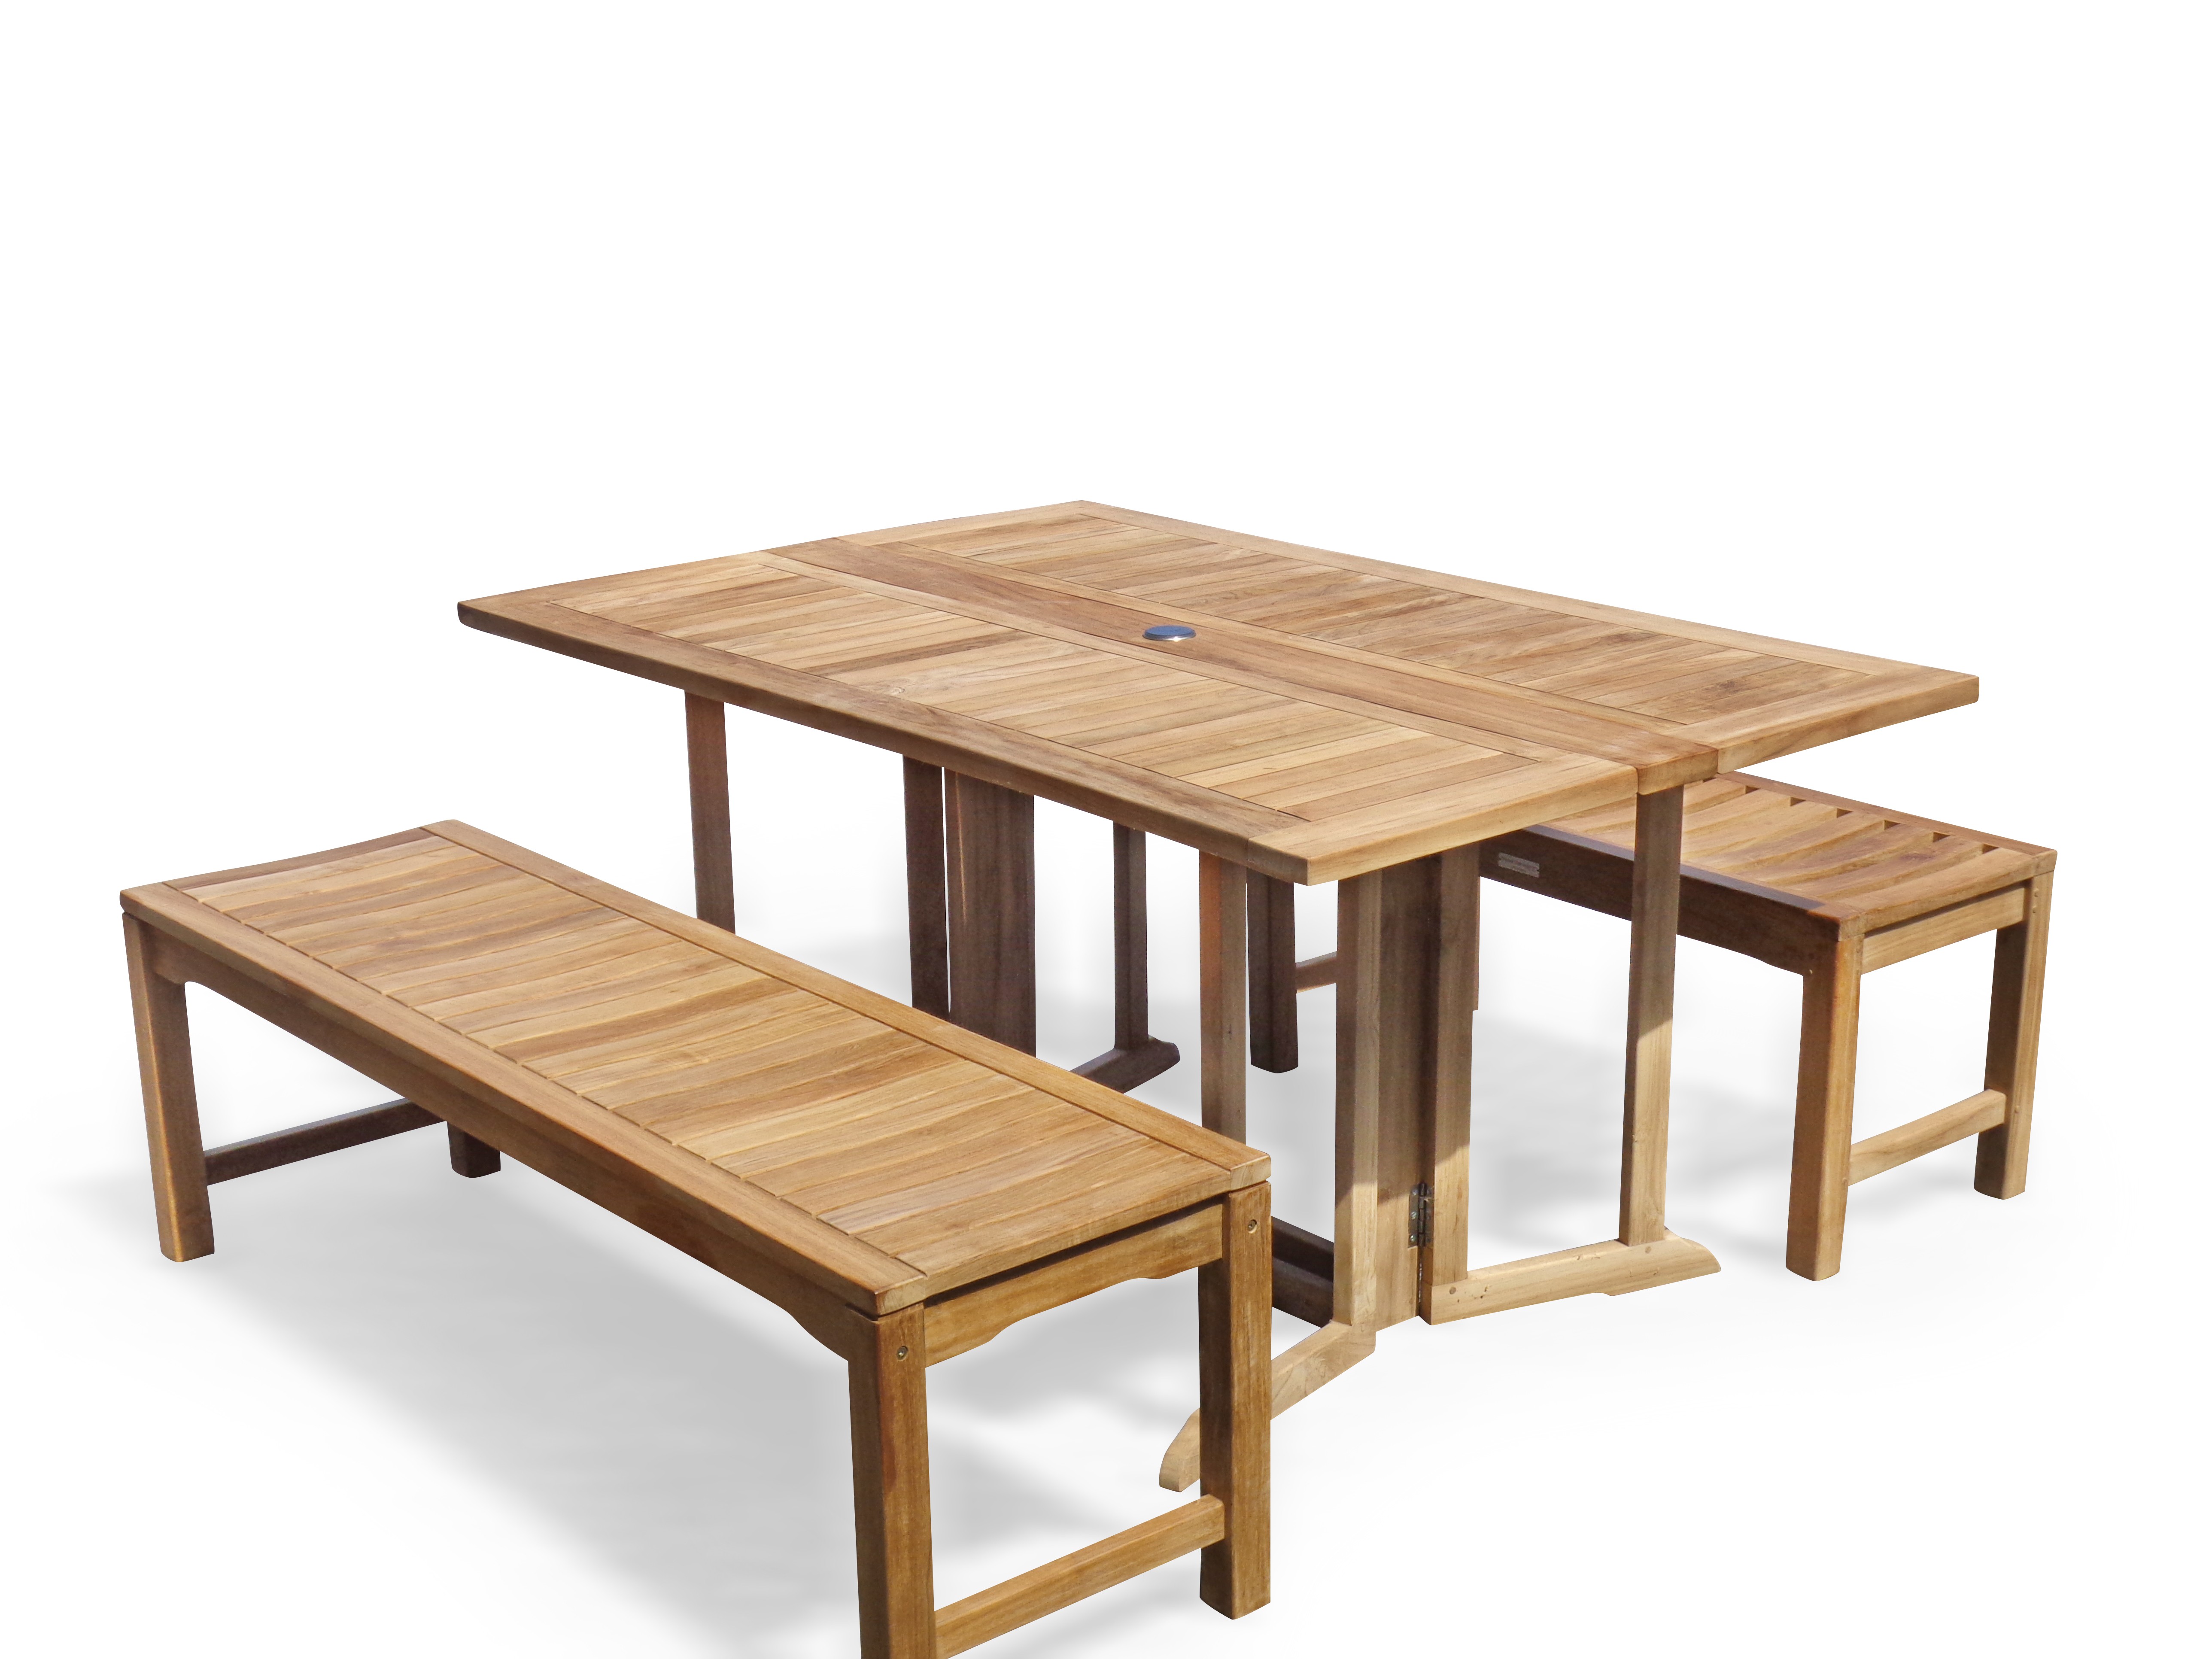 Barcelone 59" x 39" Rectangular Drop Leaf Folding Teak Table W/two 59" Backless Benches...Seats 6 Adults